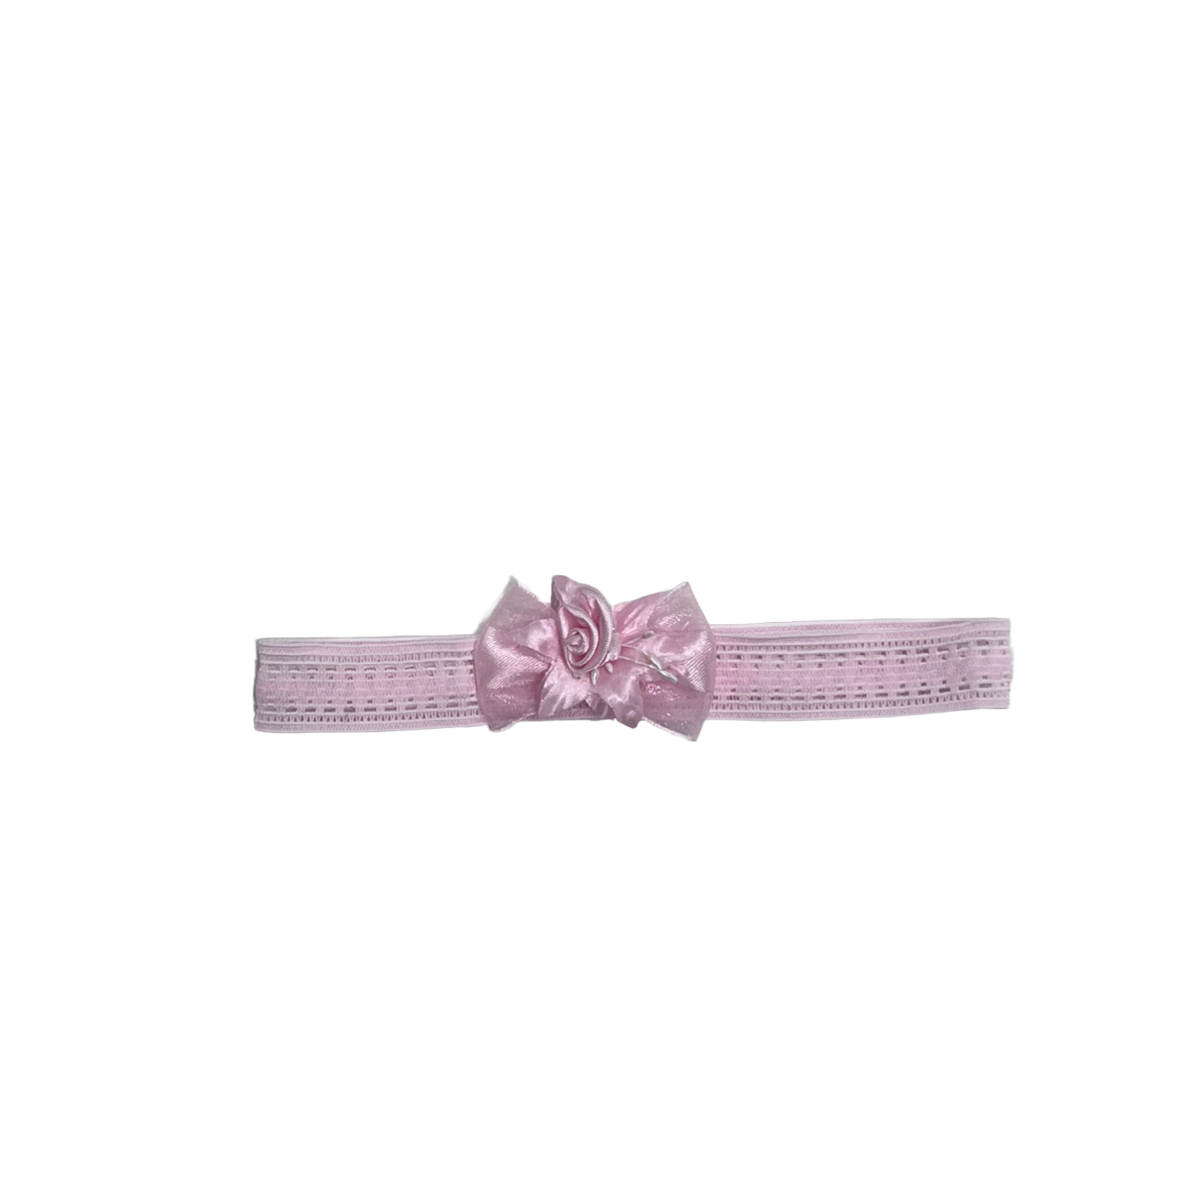 Baby Lace Headband w/ Bow and Roses